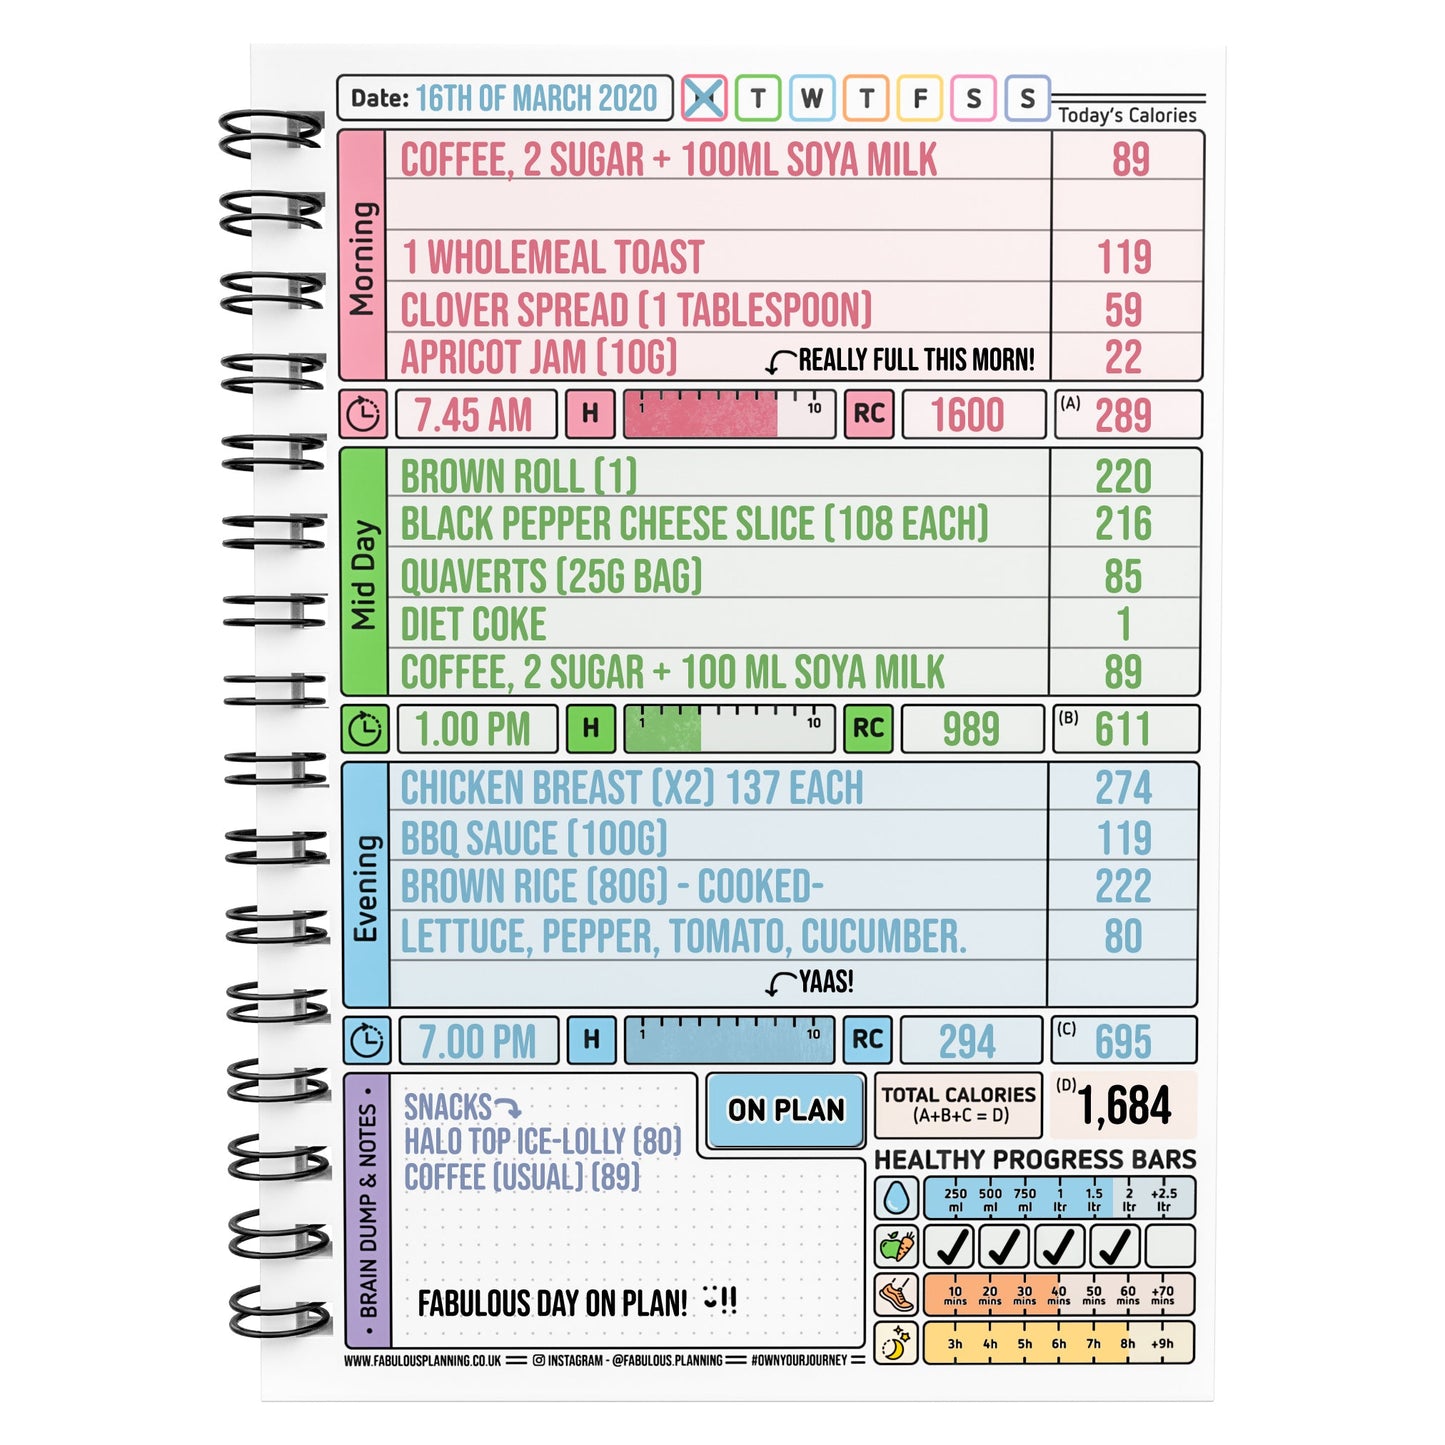 Food Diary - C33 - Calorie Counting - Fabulous Planning - [W] 3MTH - CAL - C33+